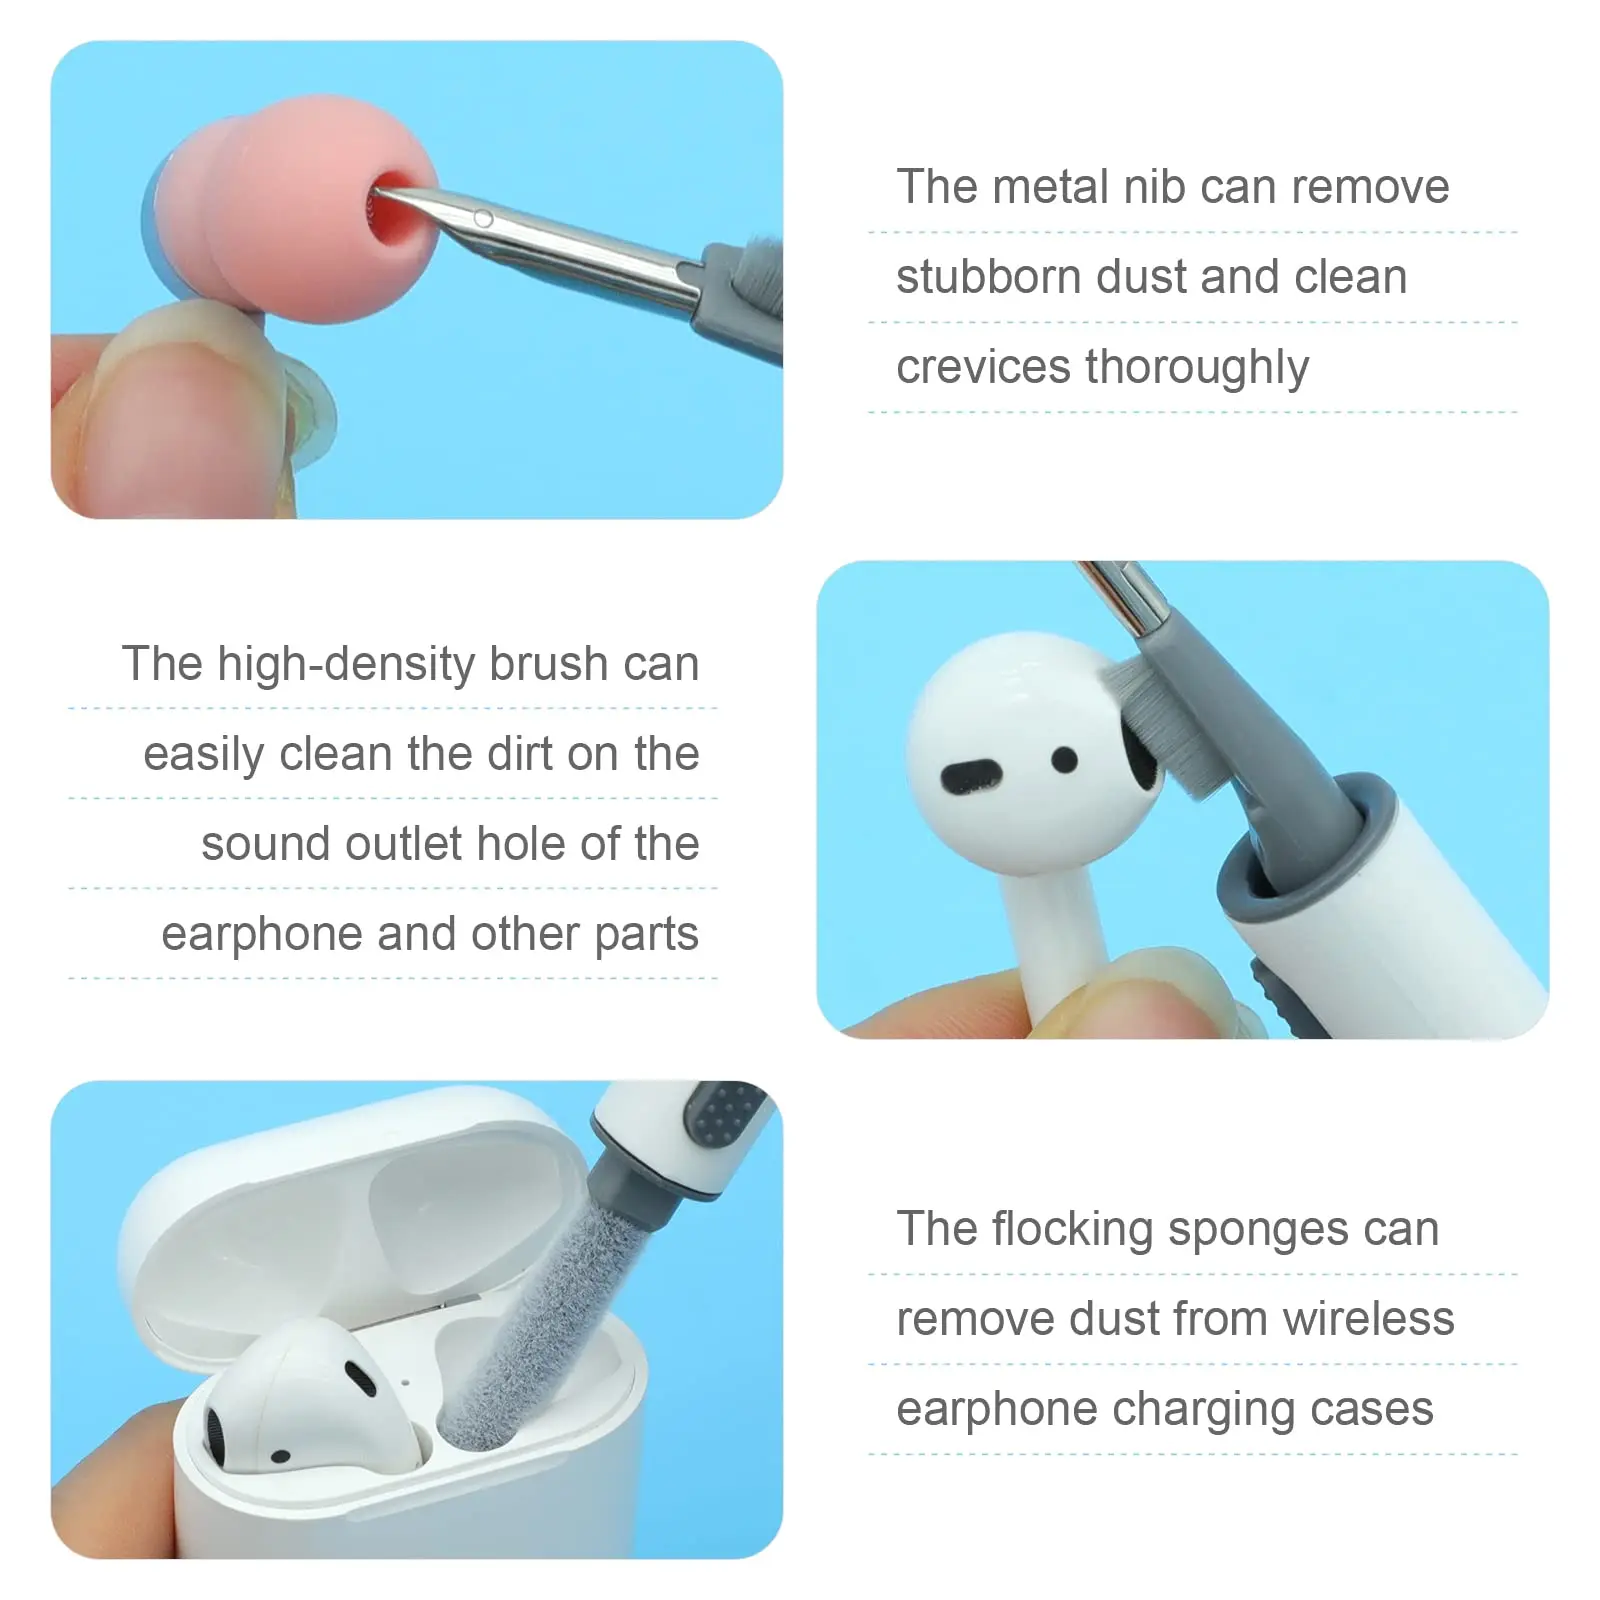 Hagibis Keyboard Cleaning Brush Computer Earphone Cleaning tools Keyboard  Cleaner keycap Puller kit for PC Airpods Pro 1 2